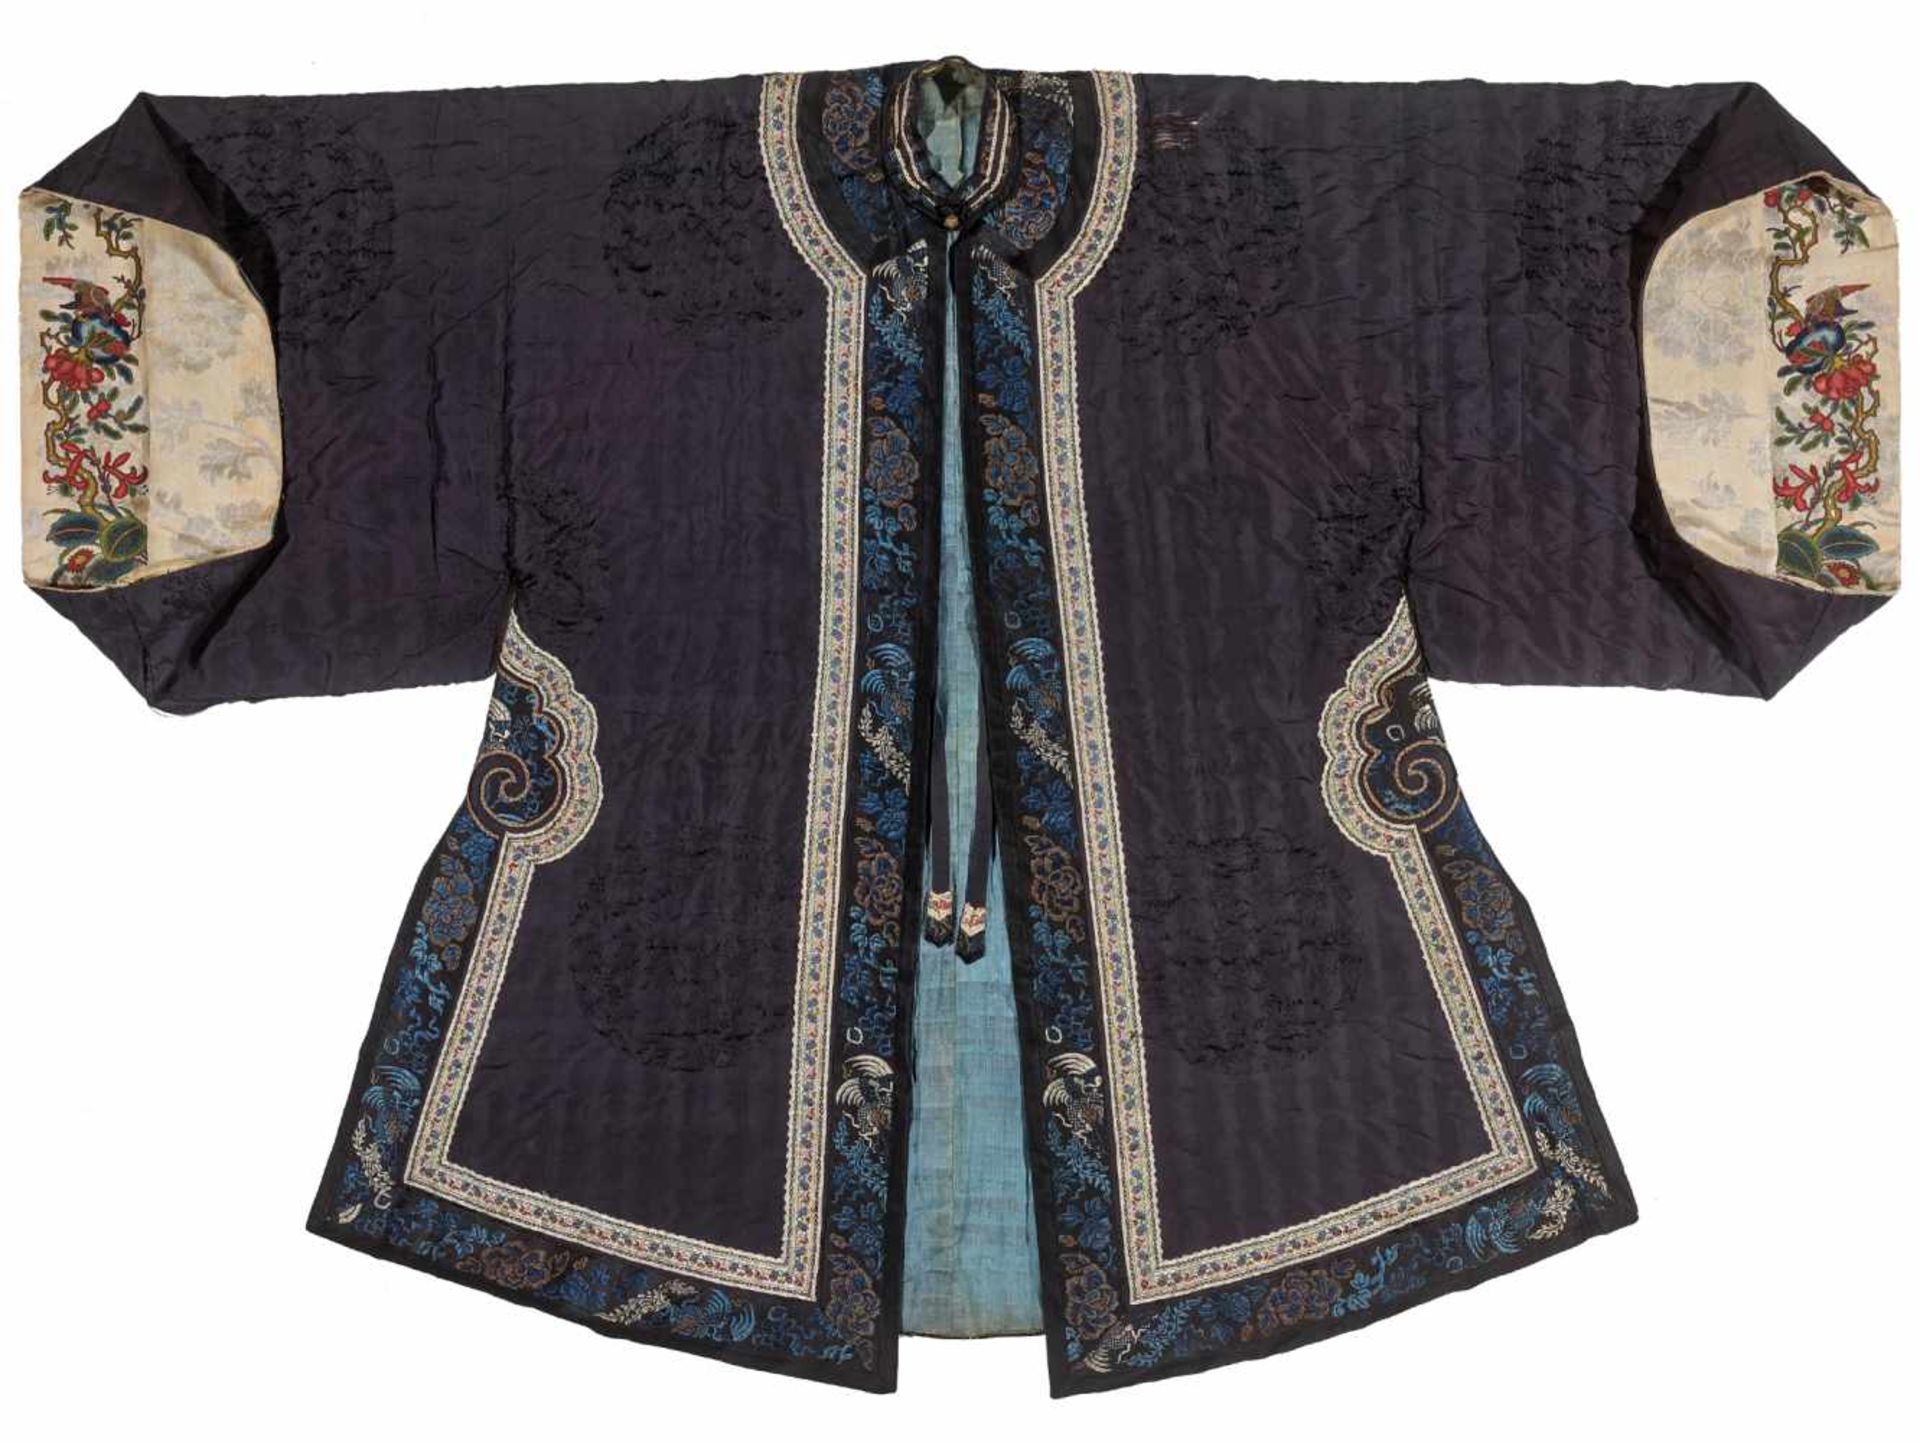 A PADDED WINTER SURCOAT WITH PEKINESE STITCH EMBROIDERY, QINGTextured silk with multi-colored silk